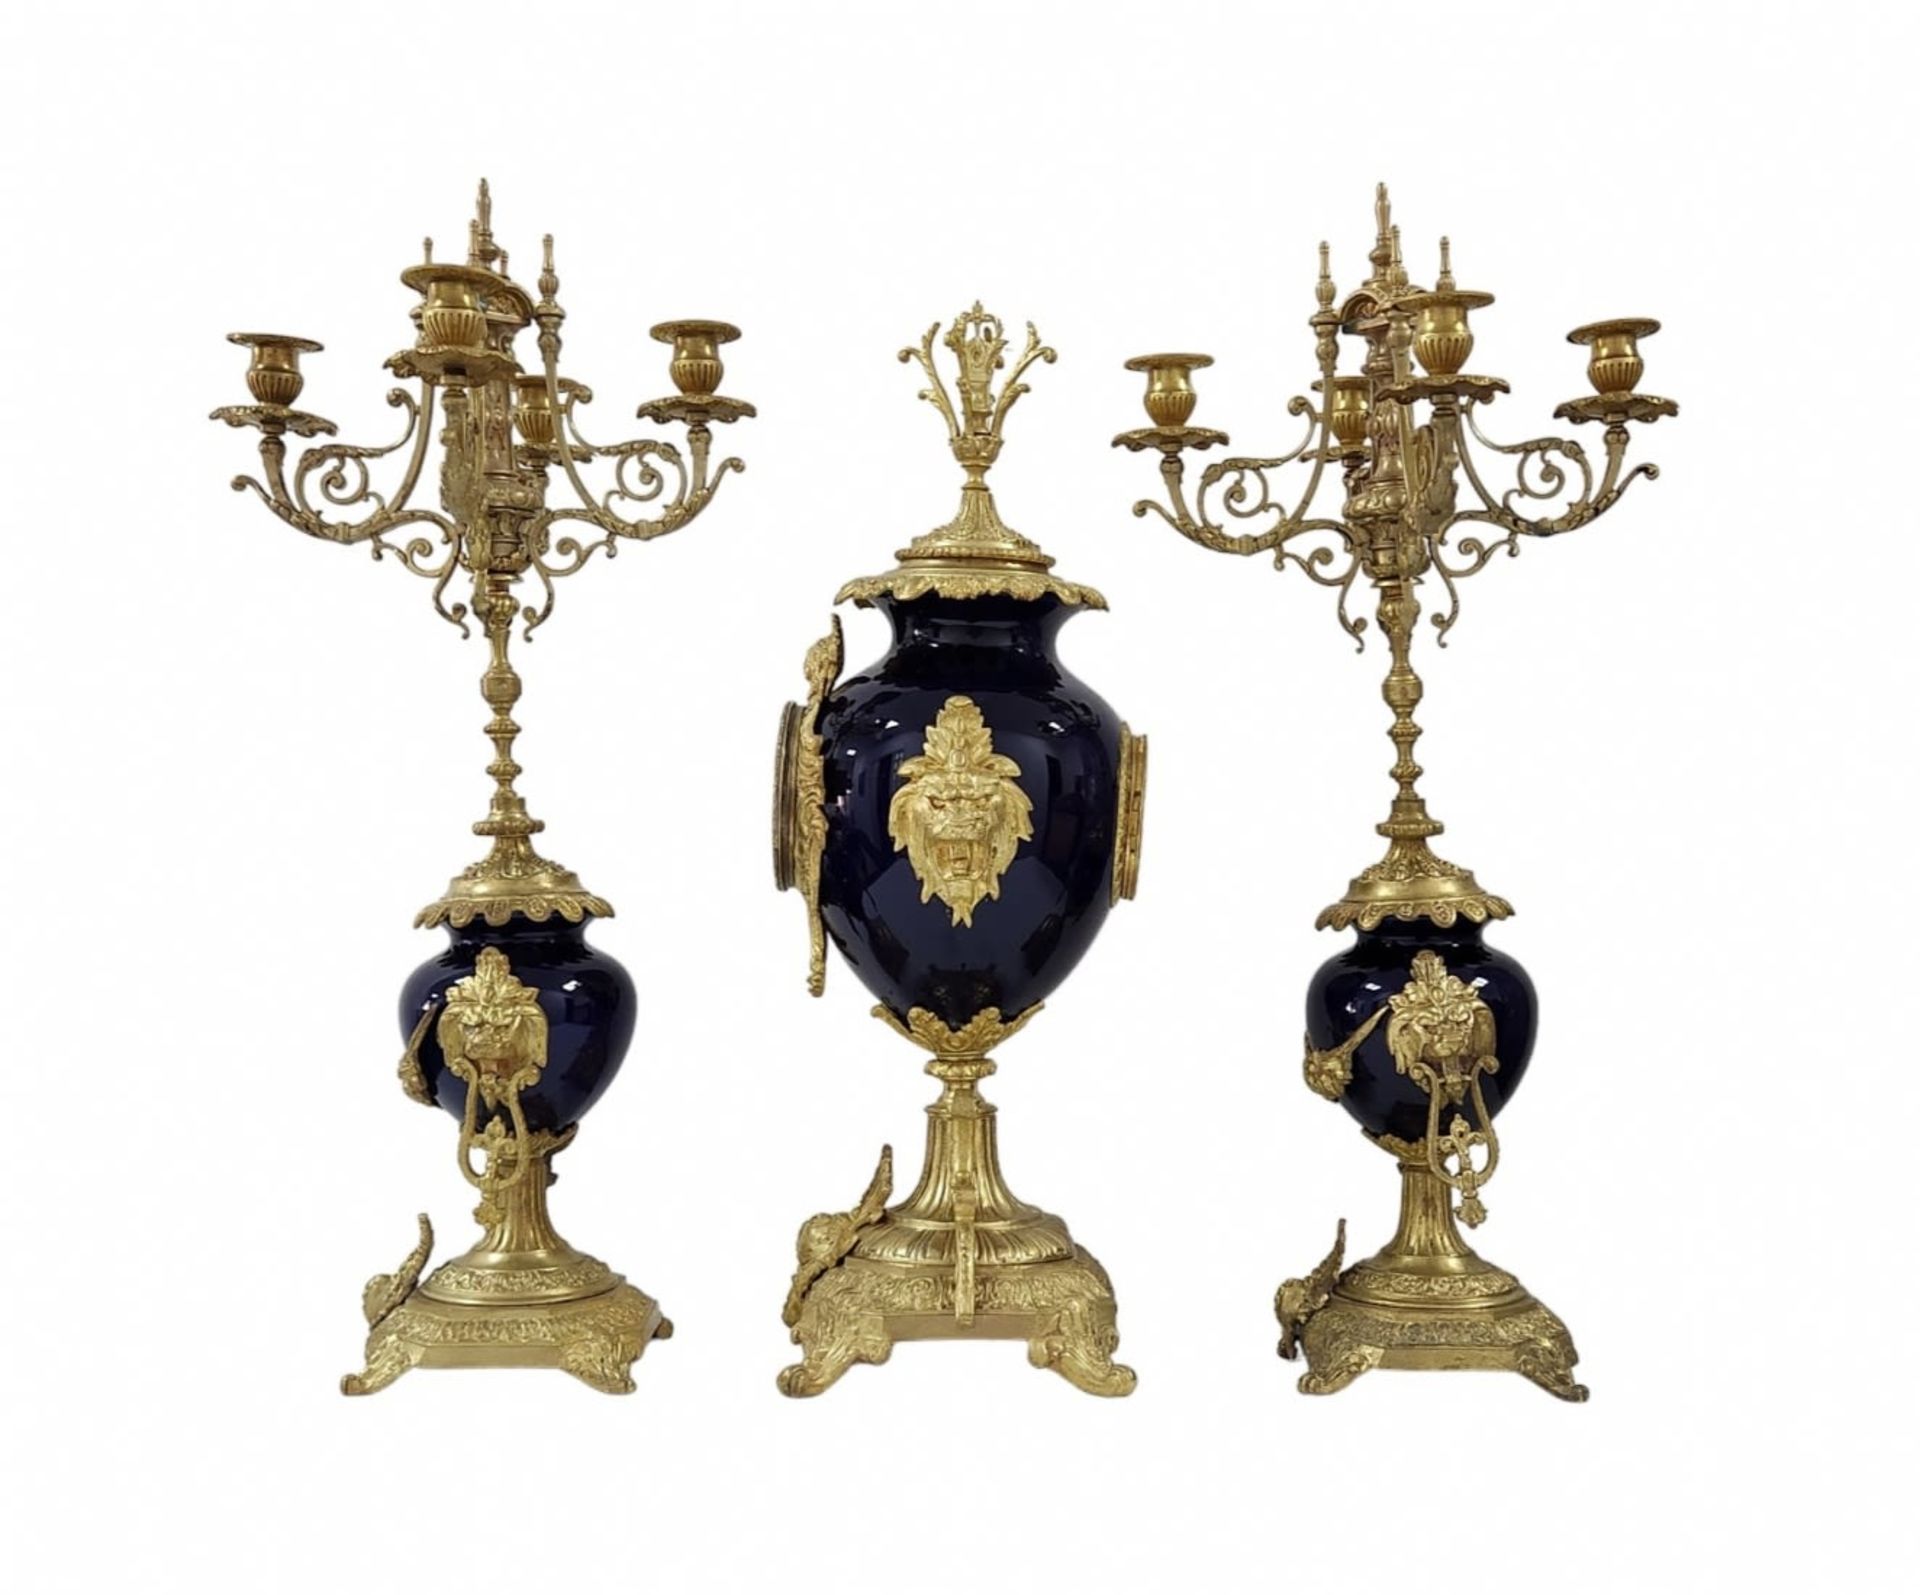 Antique French Garniture, impressively large and luxurious, includes a mantle clock and a pair of - Image 4 of 10